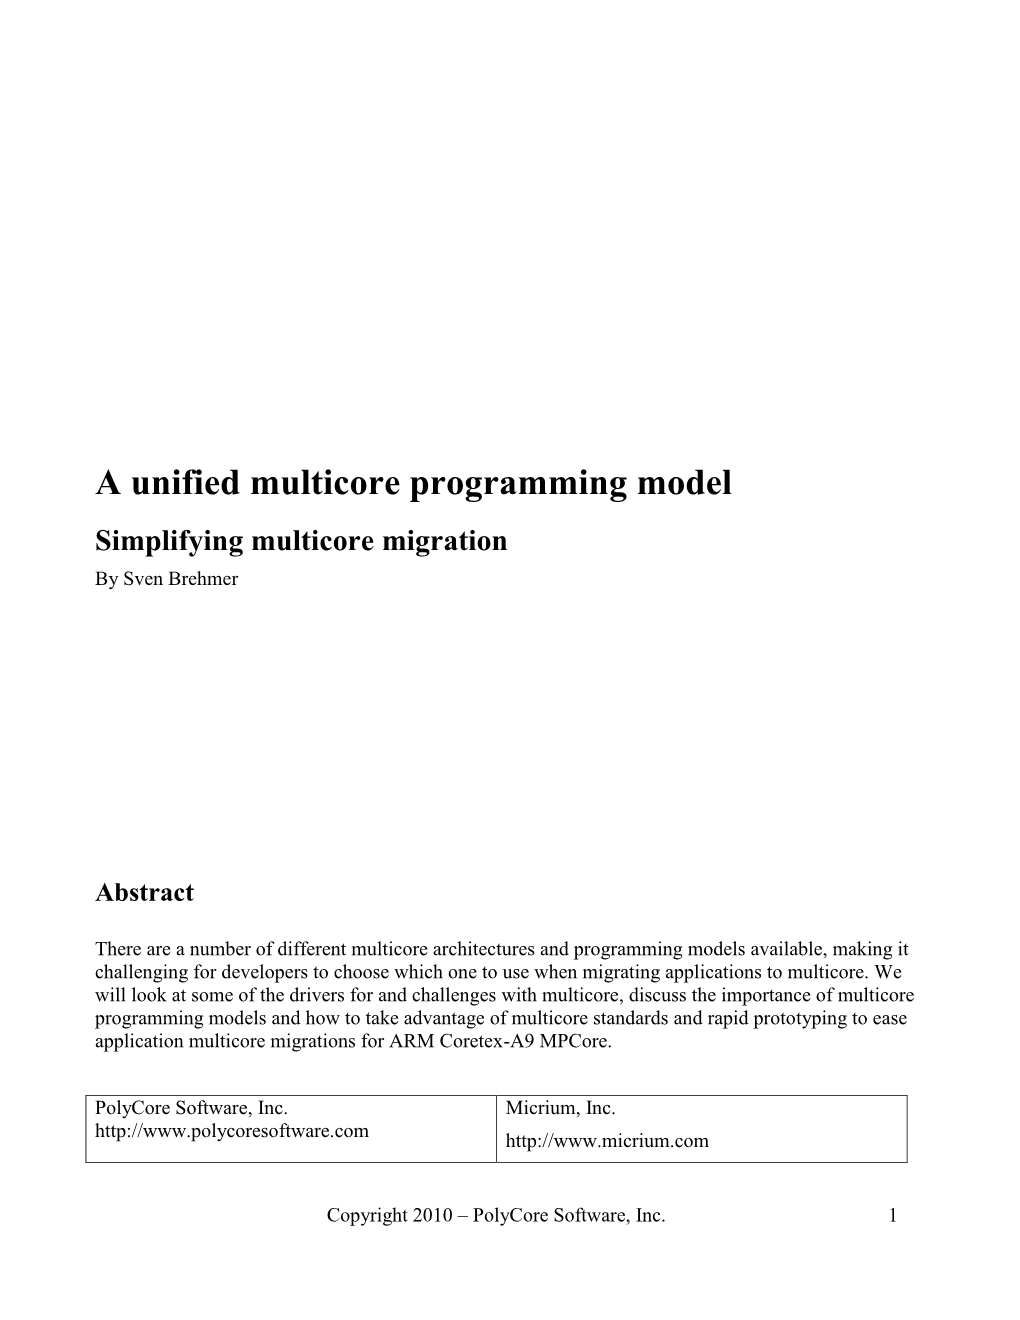 A Unified Multicore Programming Model Simplifying Multicore Migration by Sven Brehmer